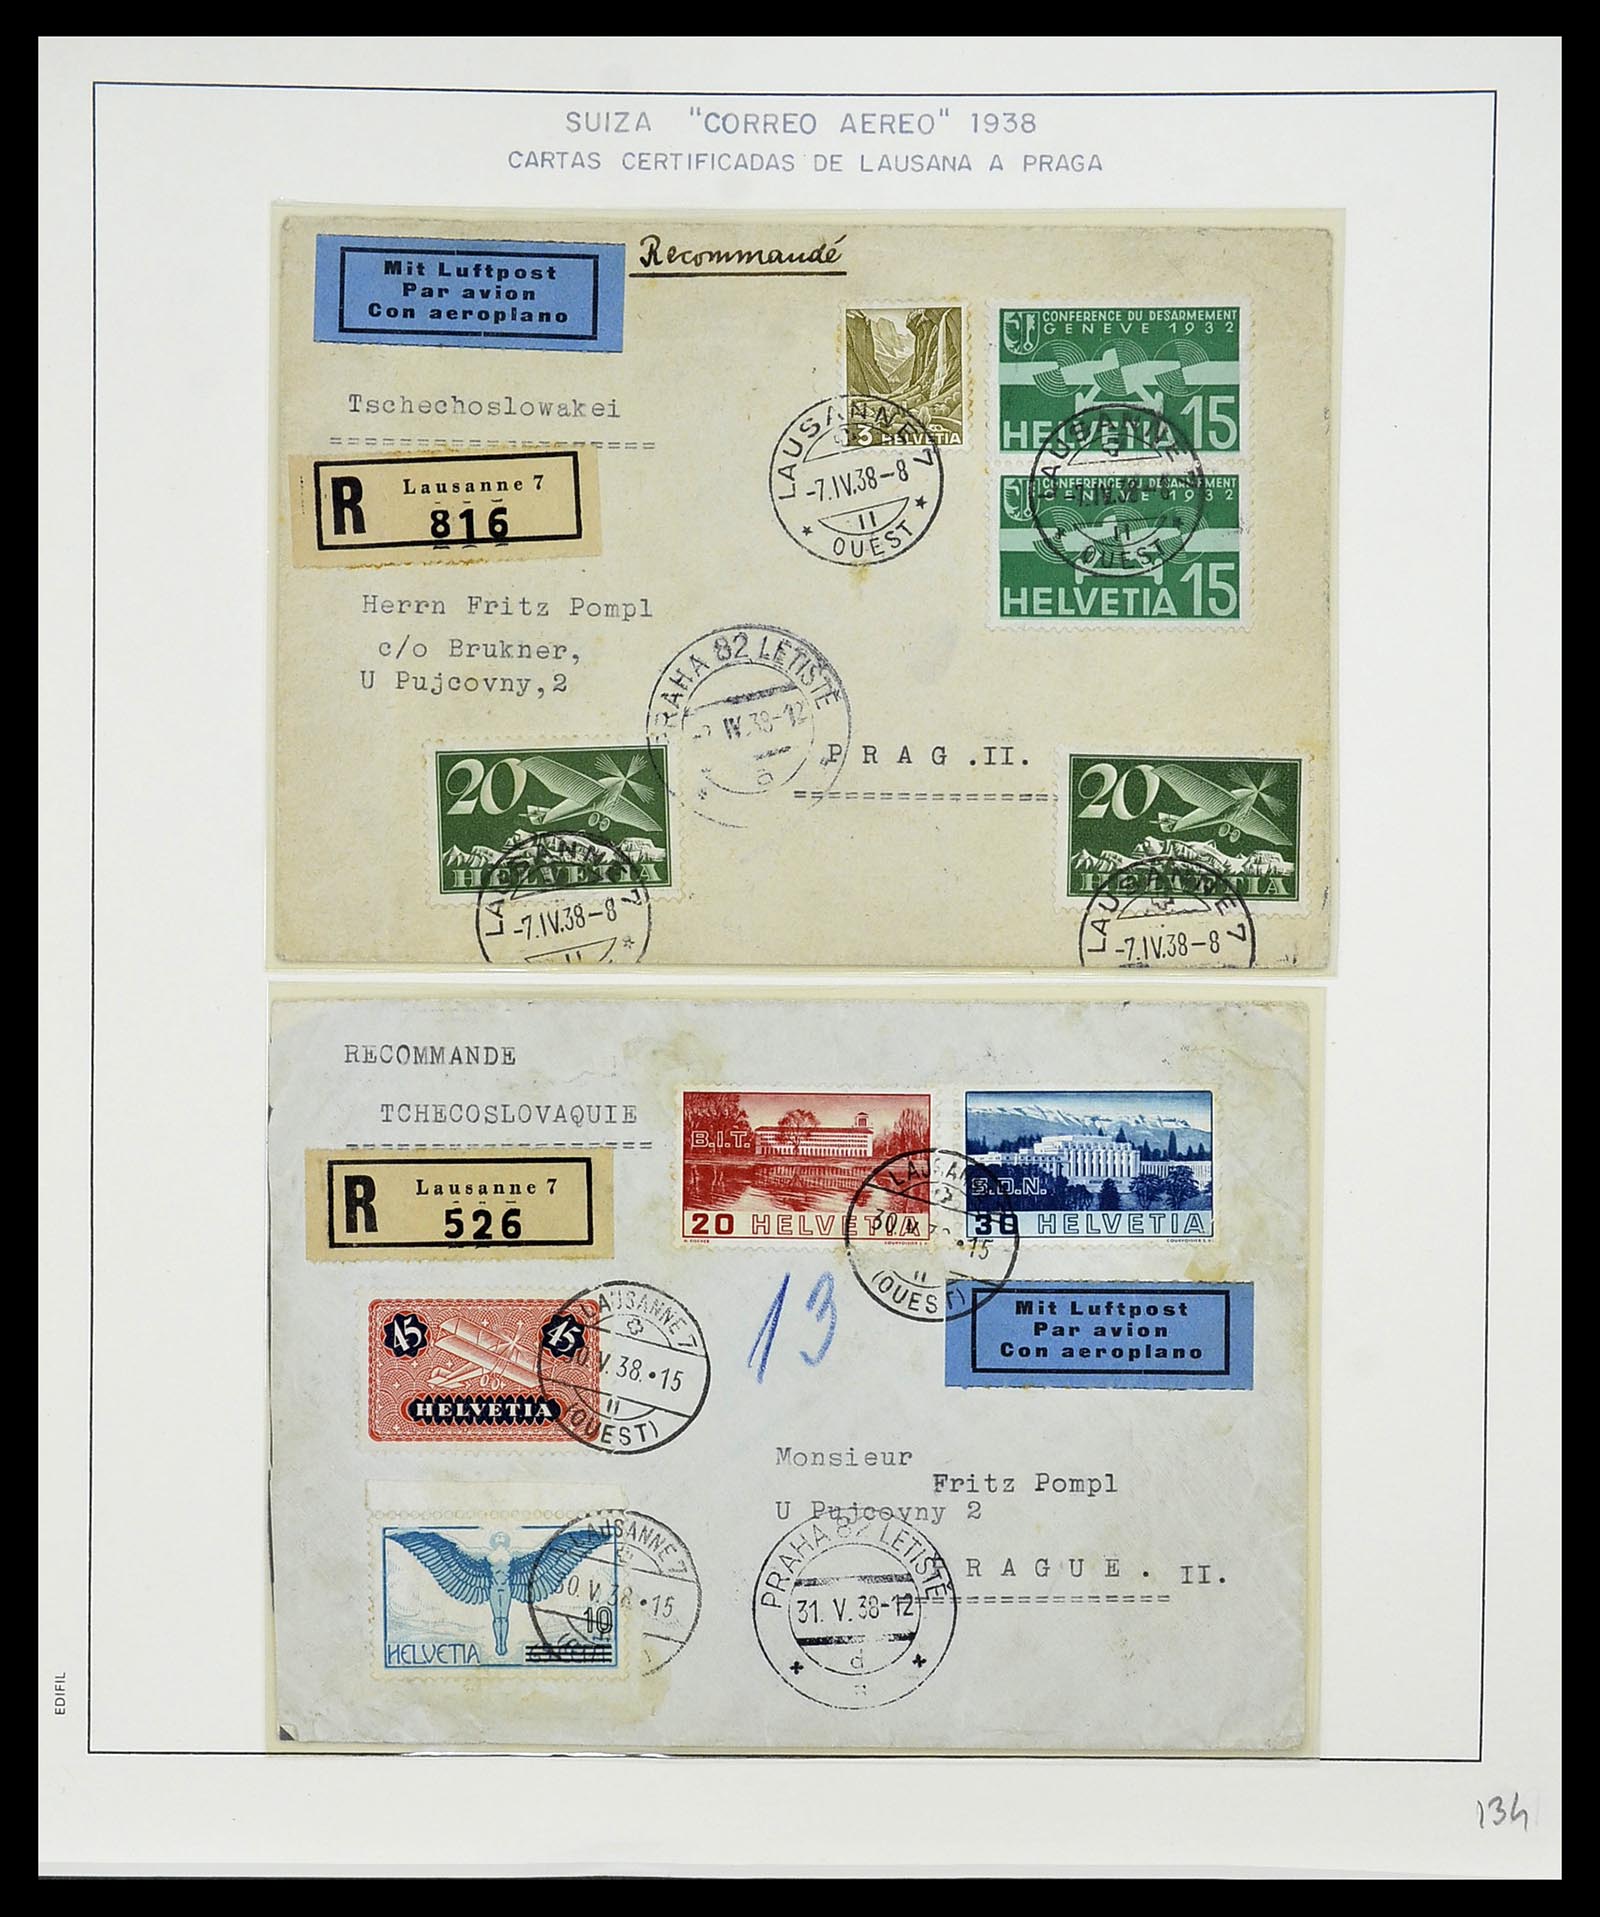 34137 072 - Stamp collection 34137 Switzerland airmail covers 1923-1963.